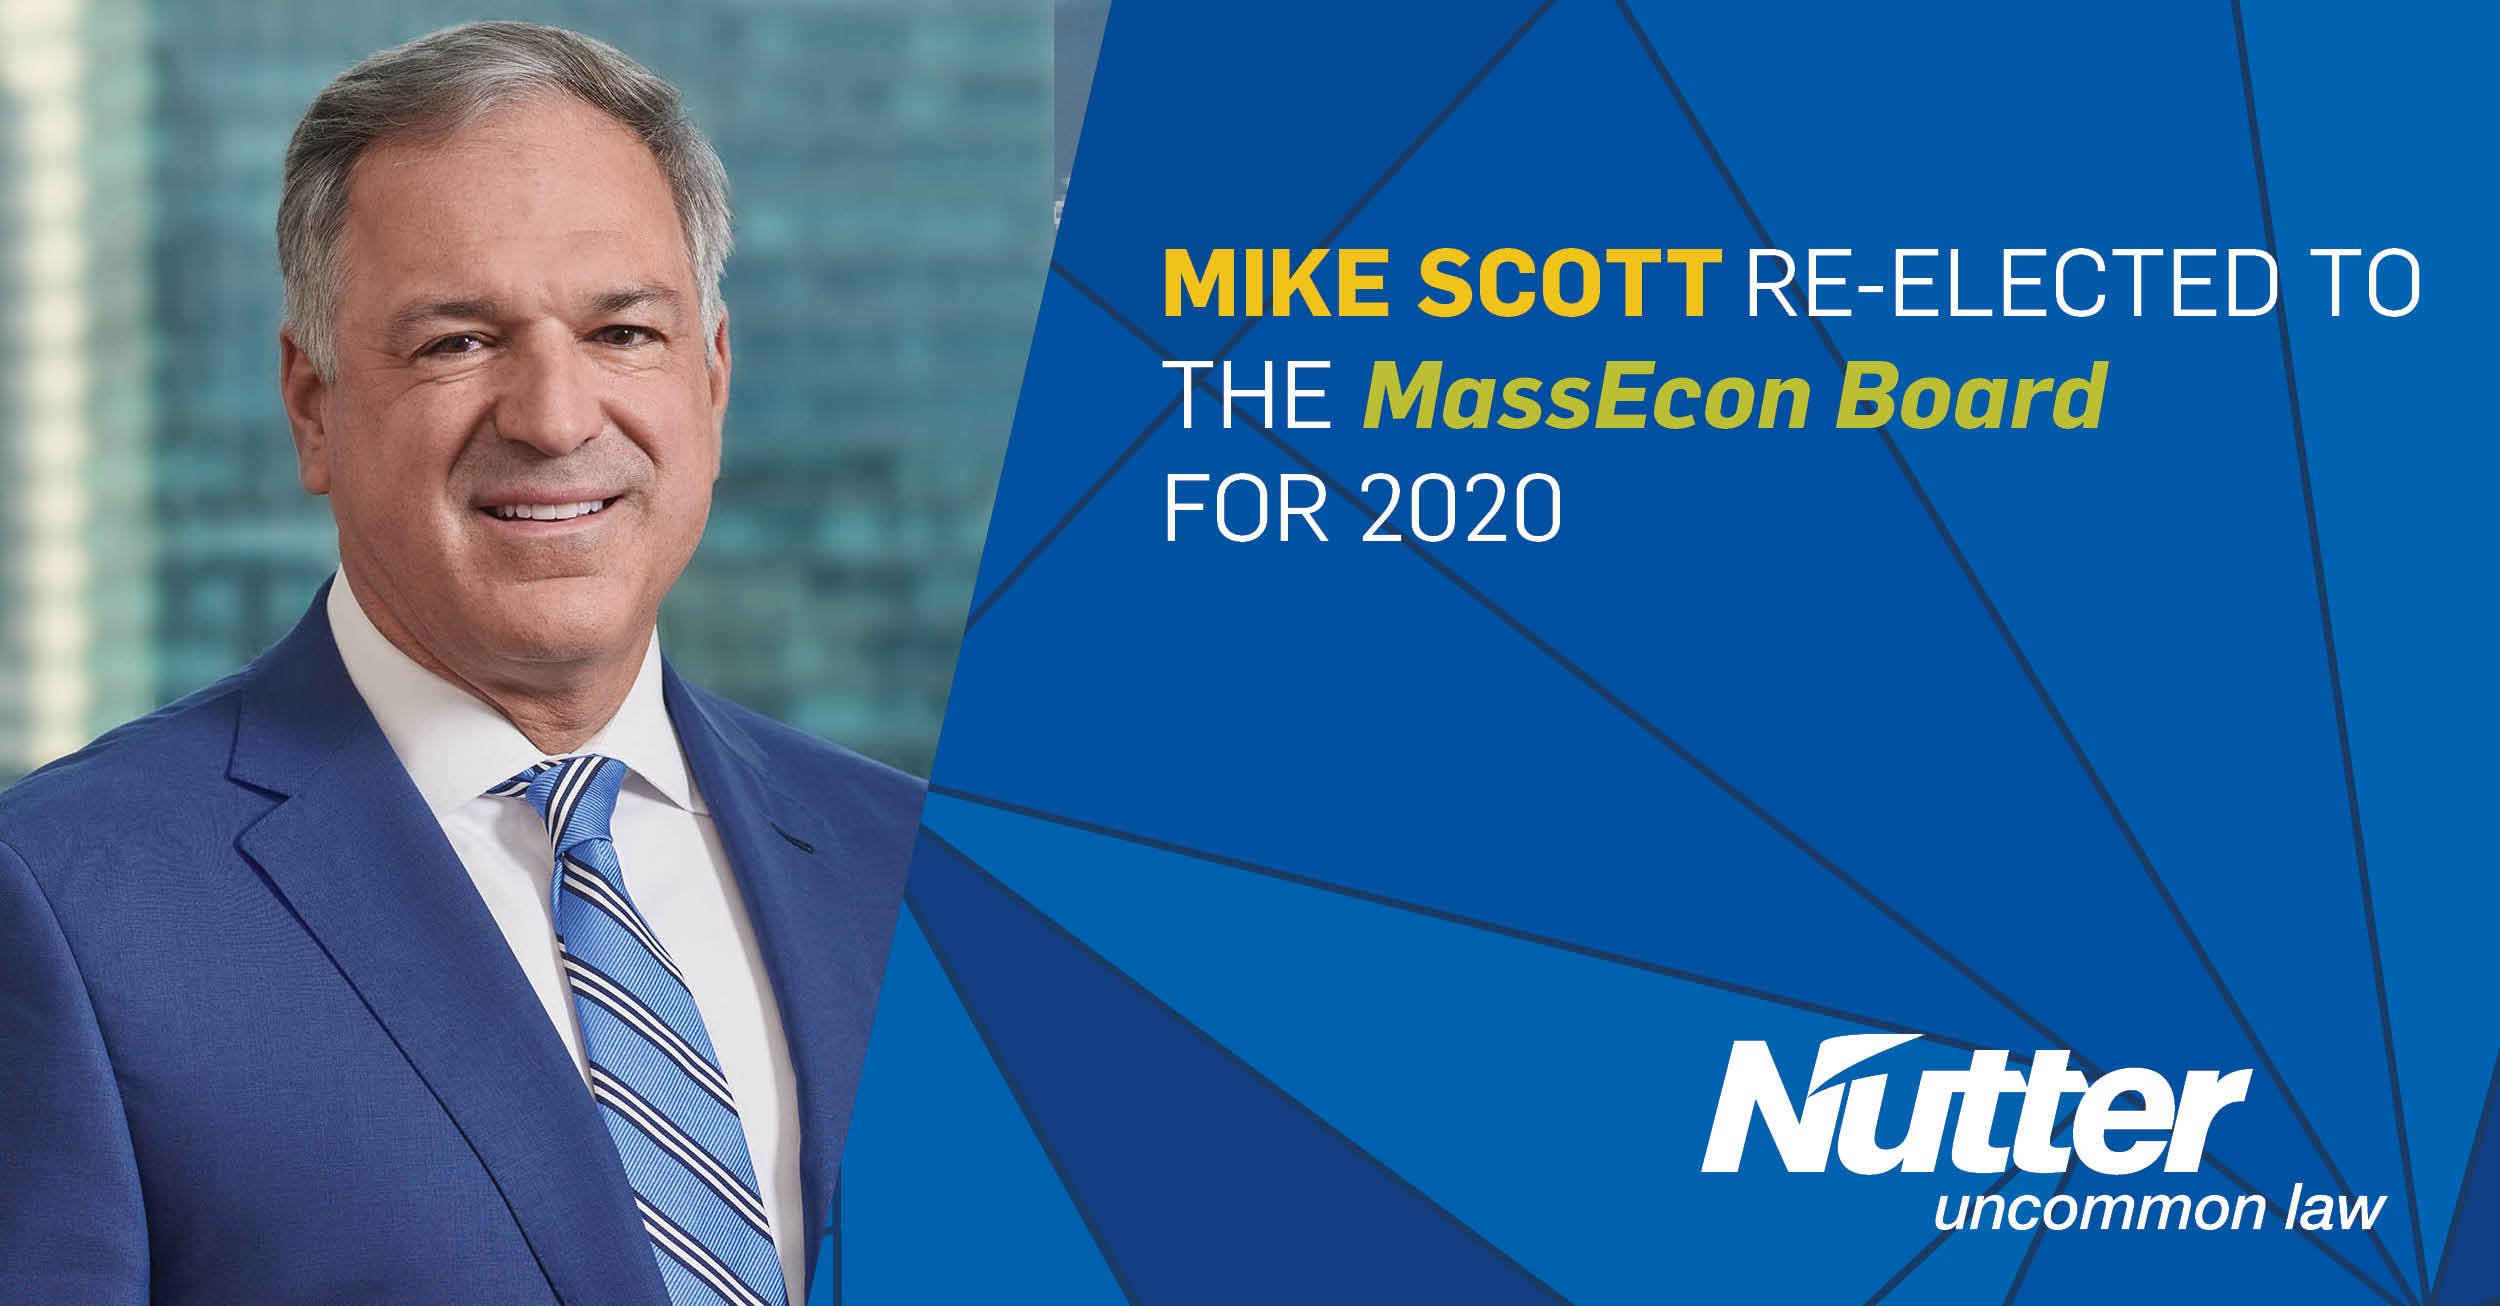 Mike Scott Re-Elected to the MassEcon Board for 2020 ...